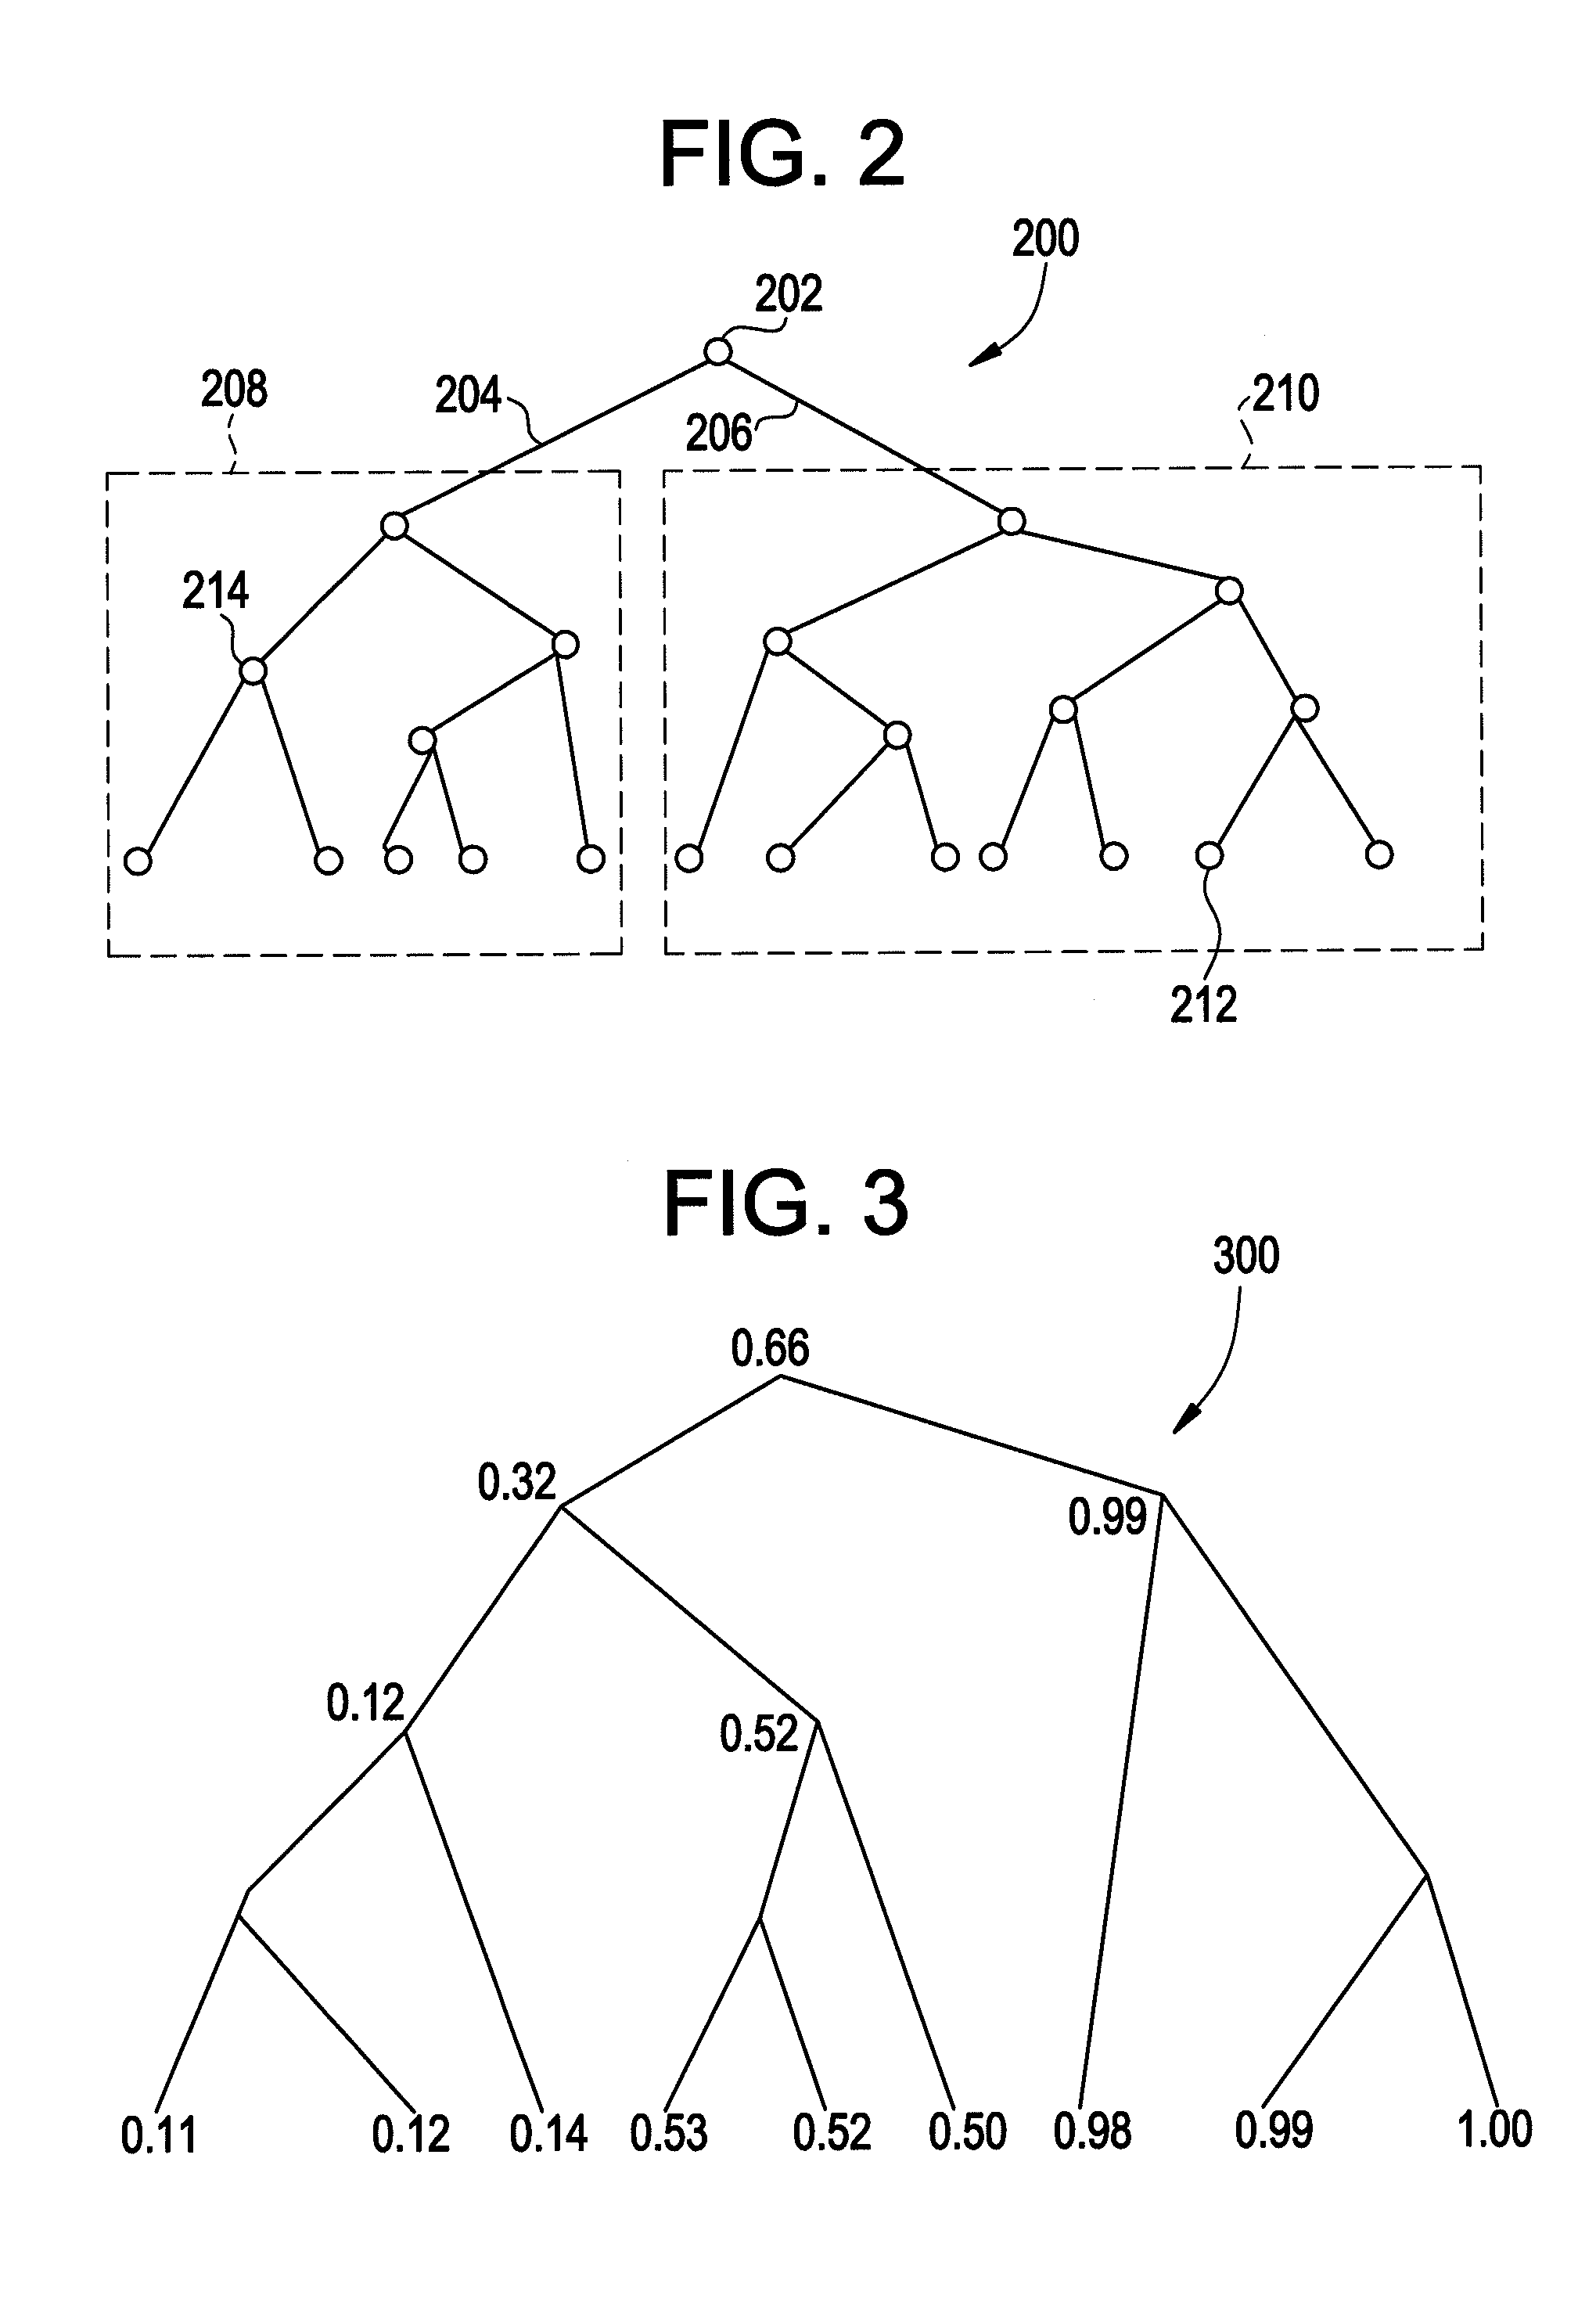 Method and platform for term extraction from large collection of documents